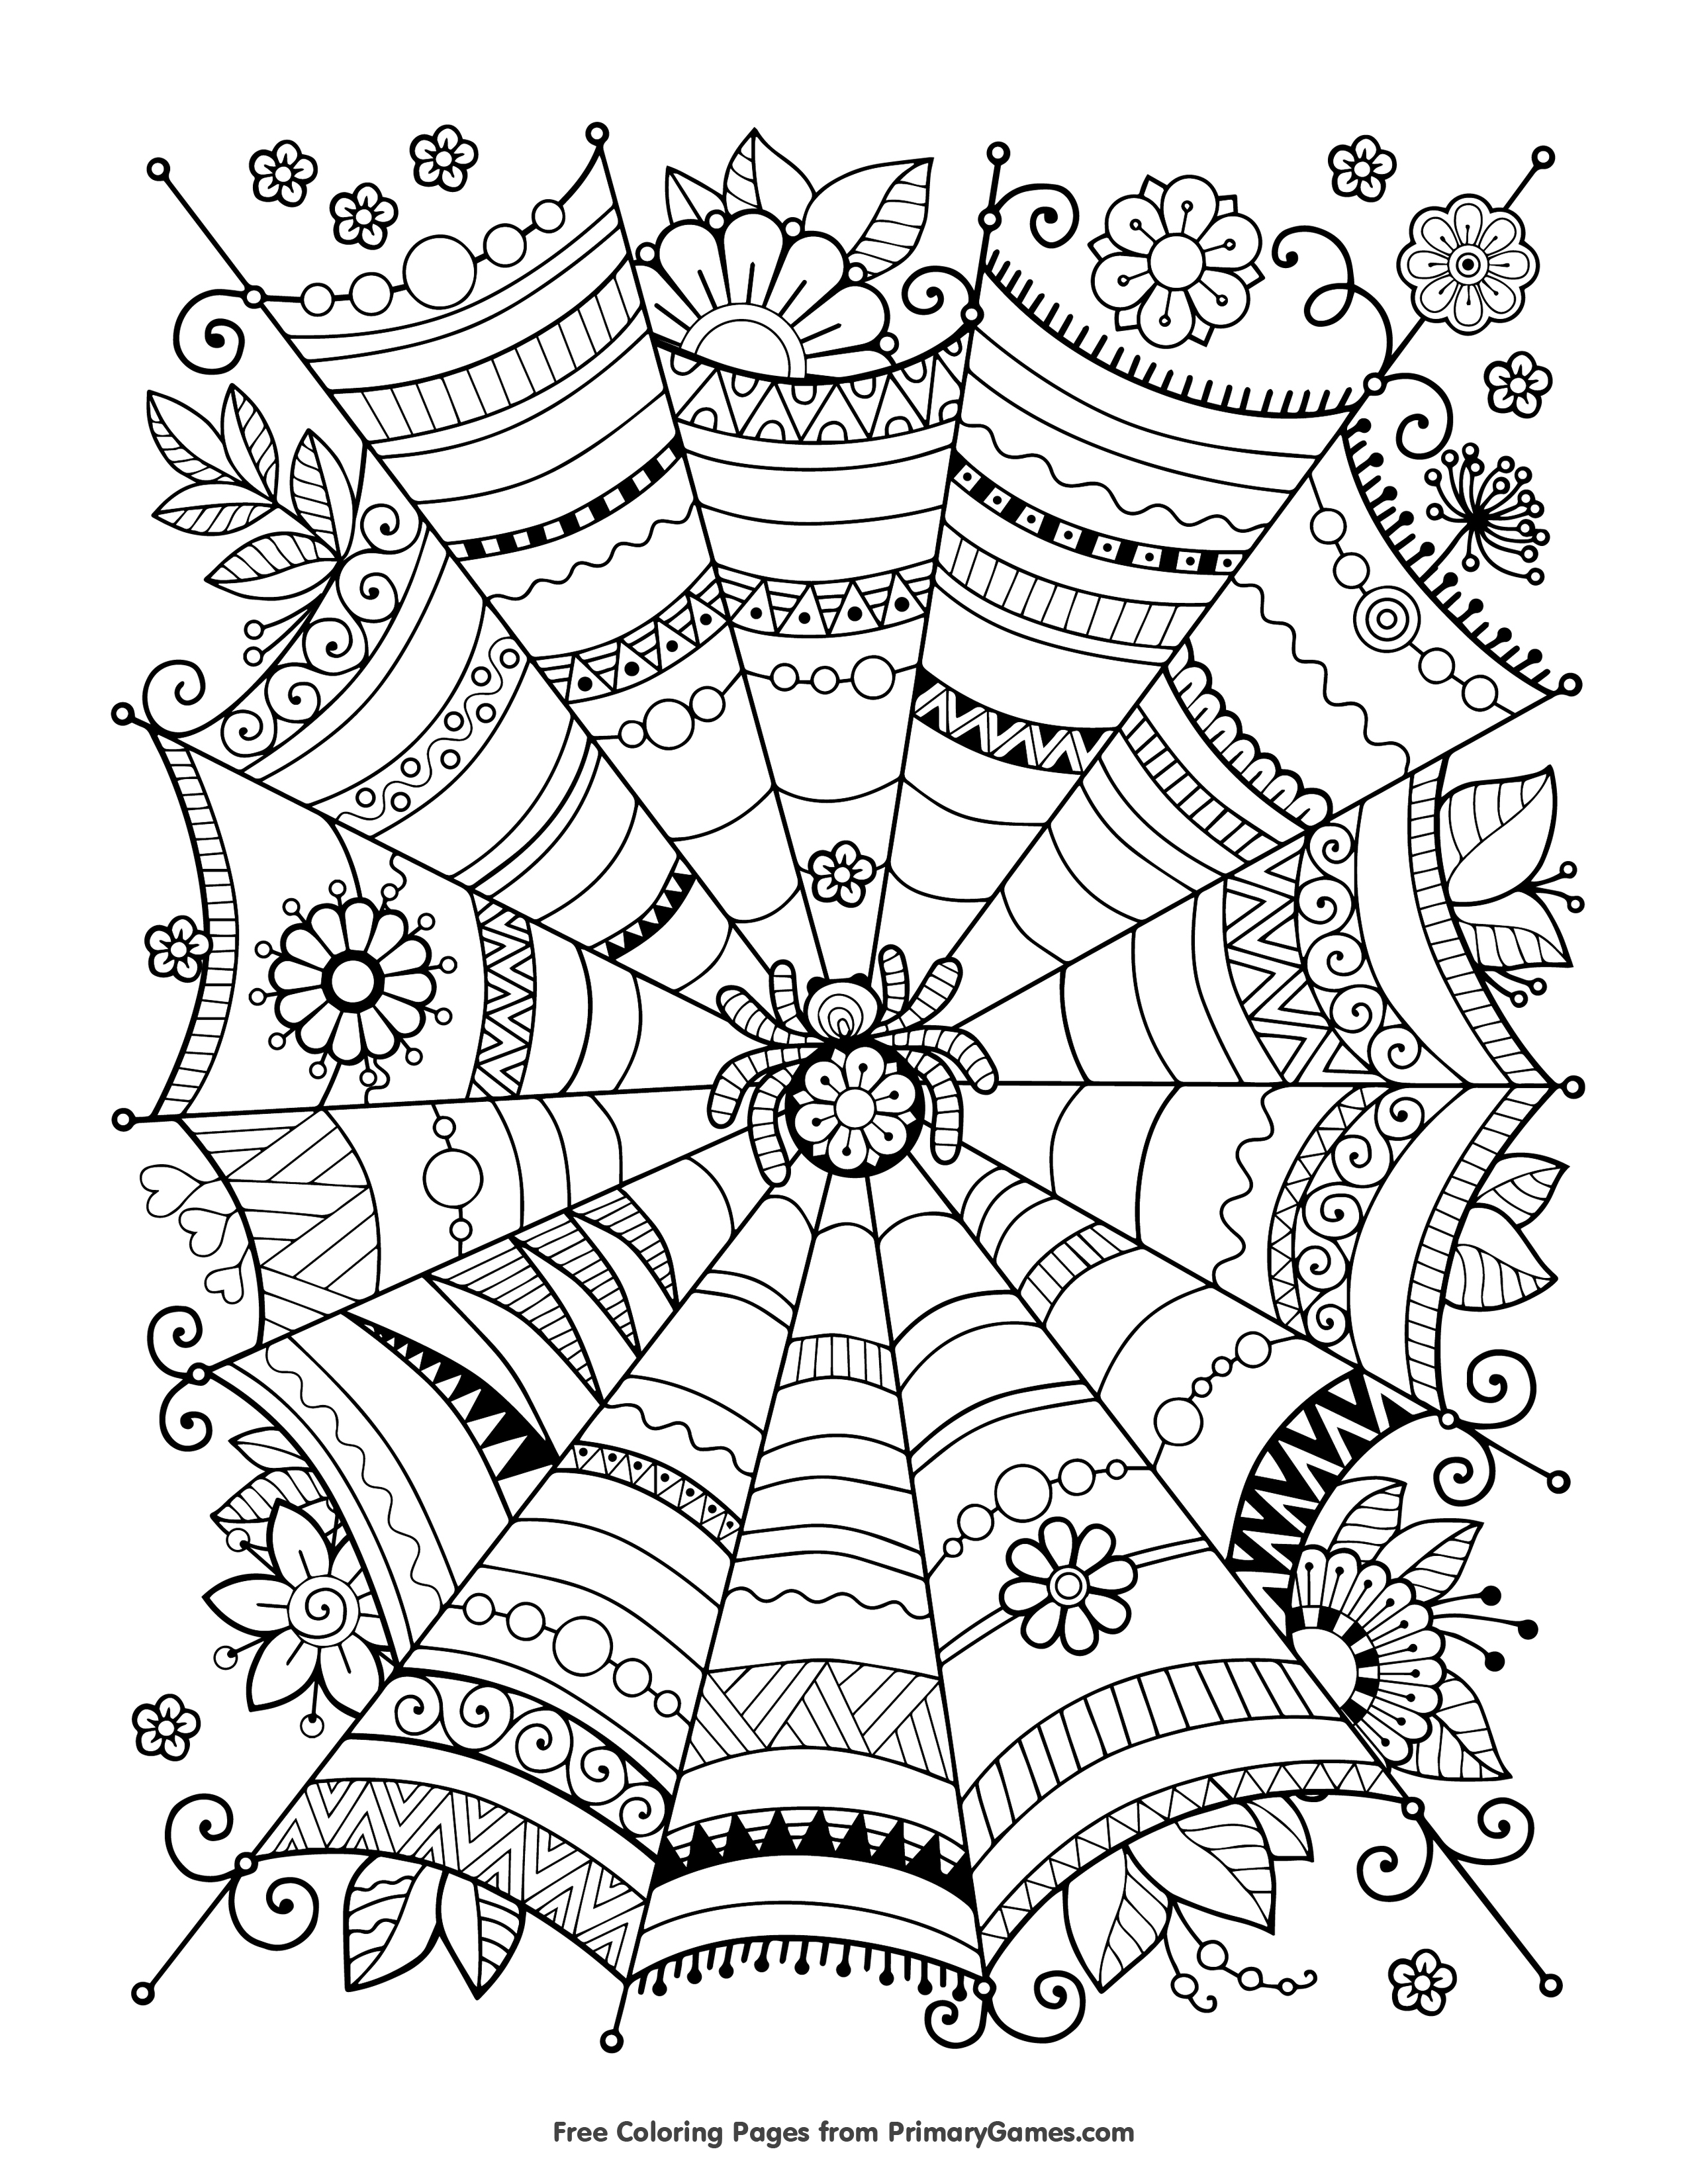 86 Top Coloring Pages Printable For Halloween For Free